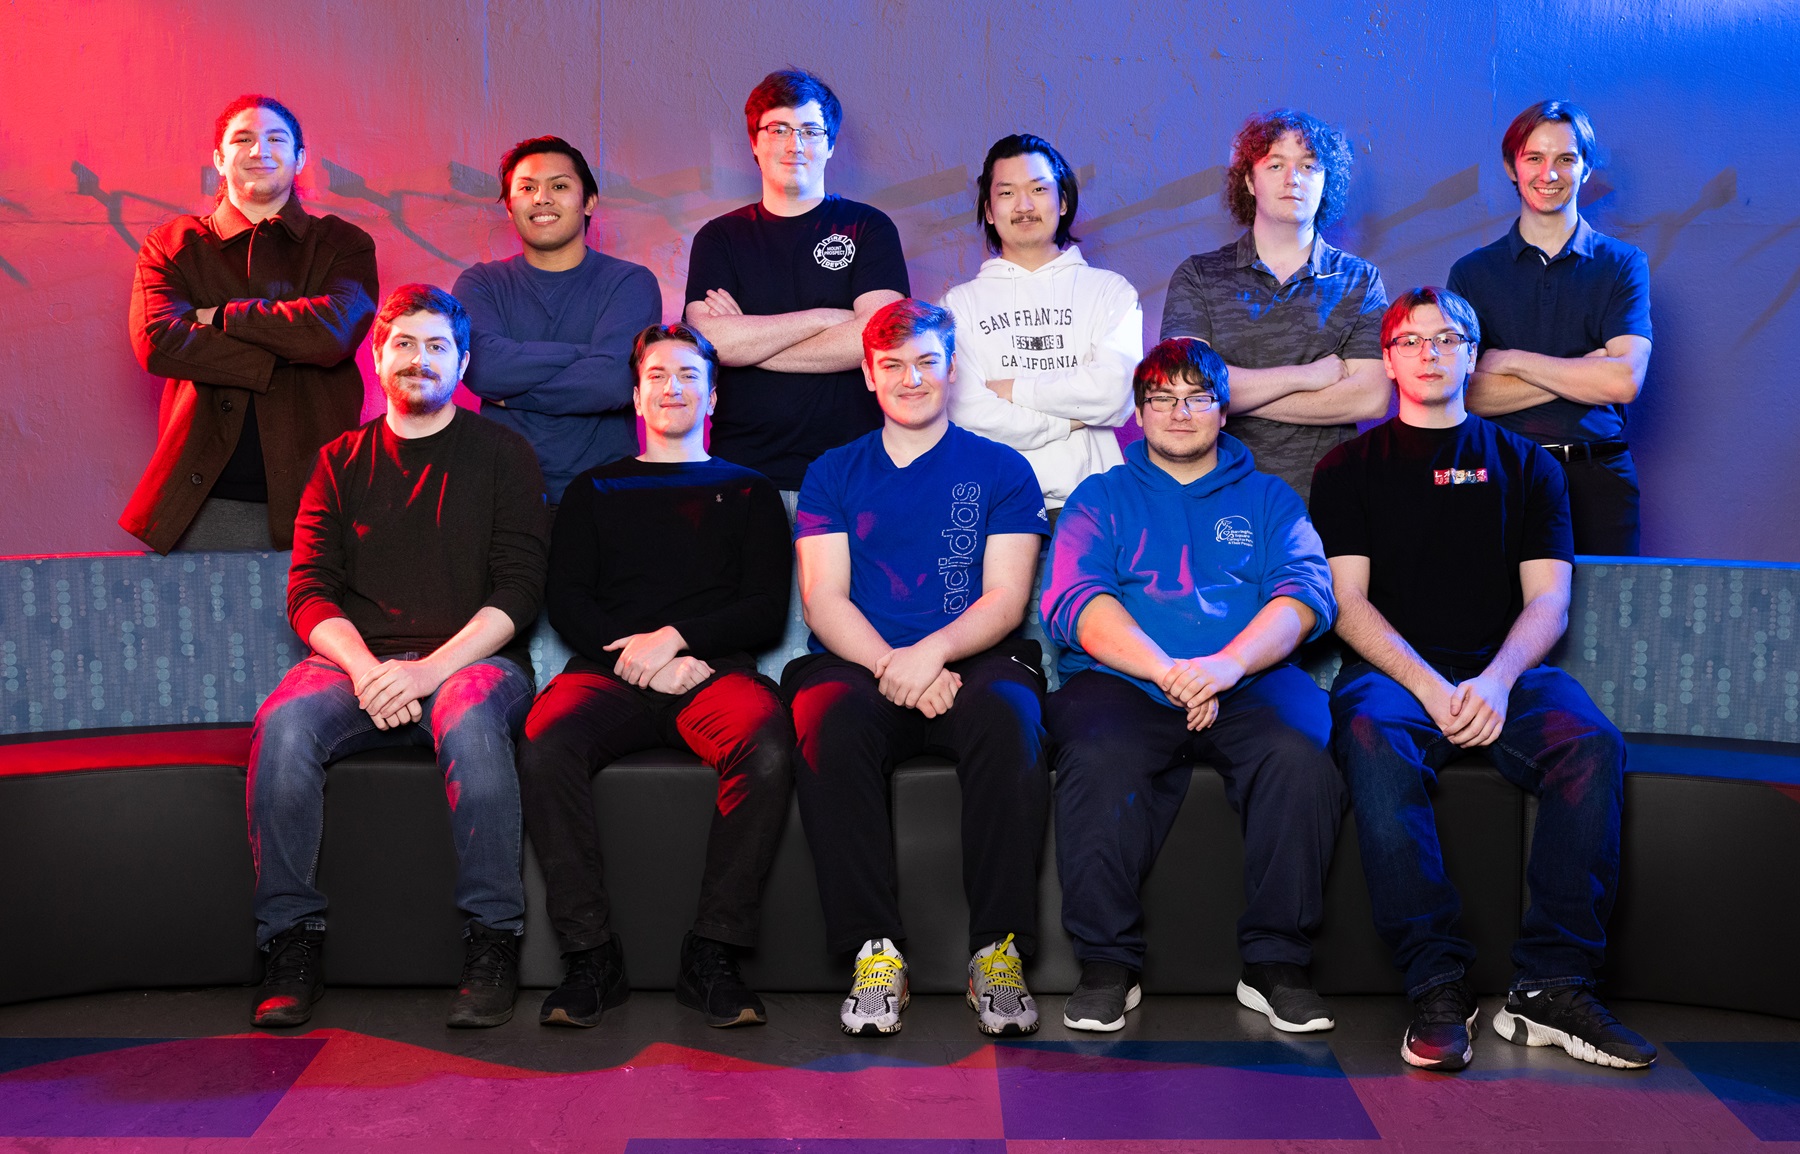 The Harper College Esports Team competes in a variety of competitions